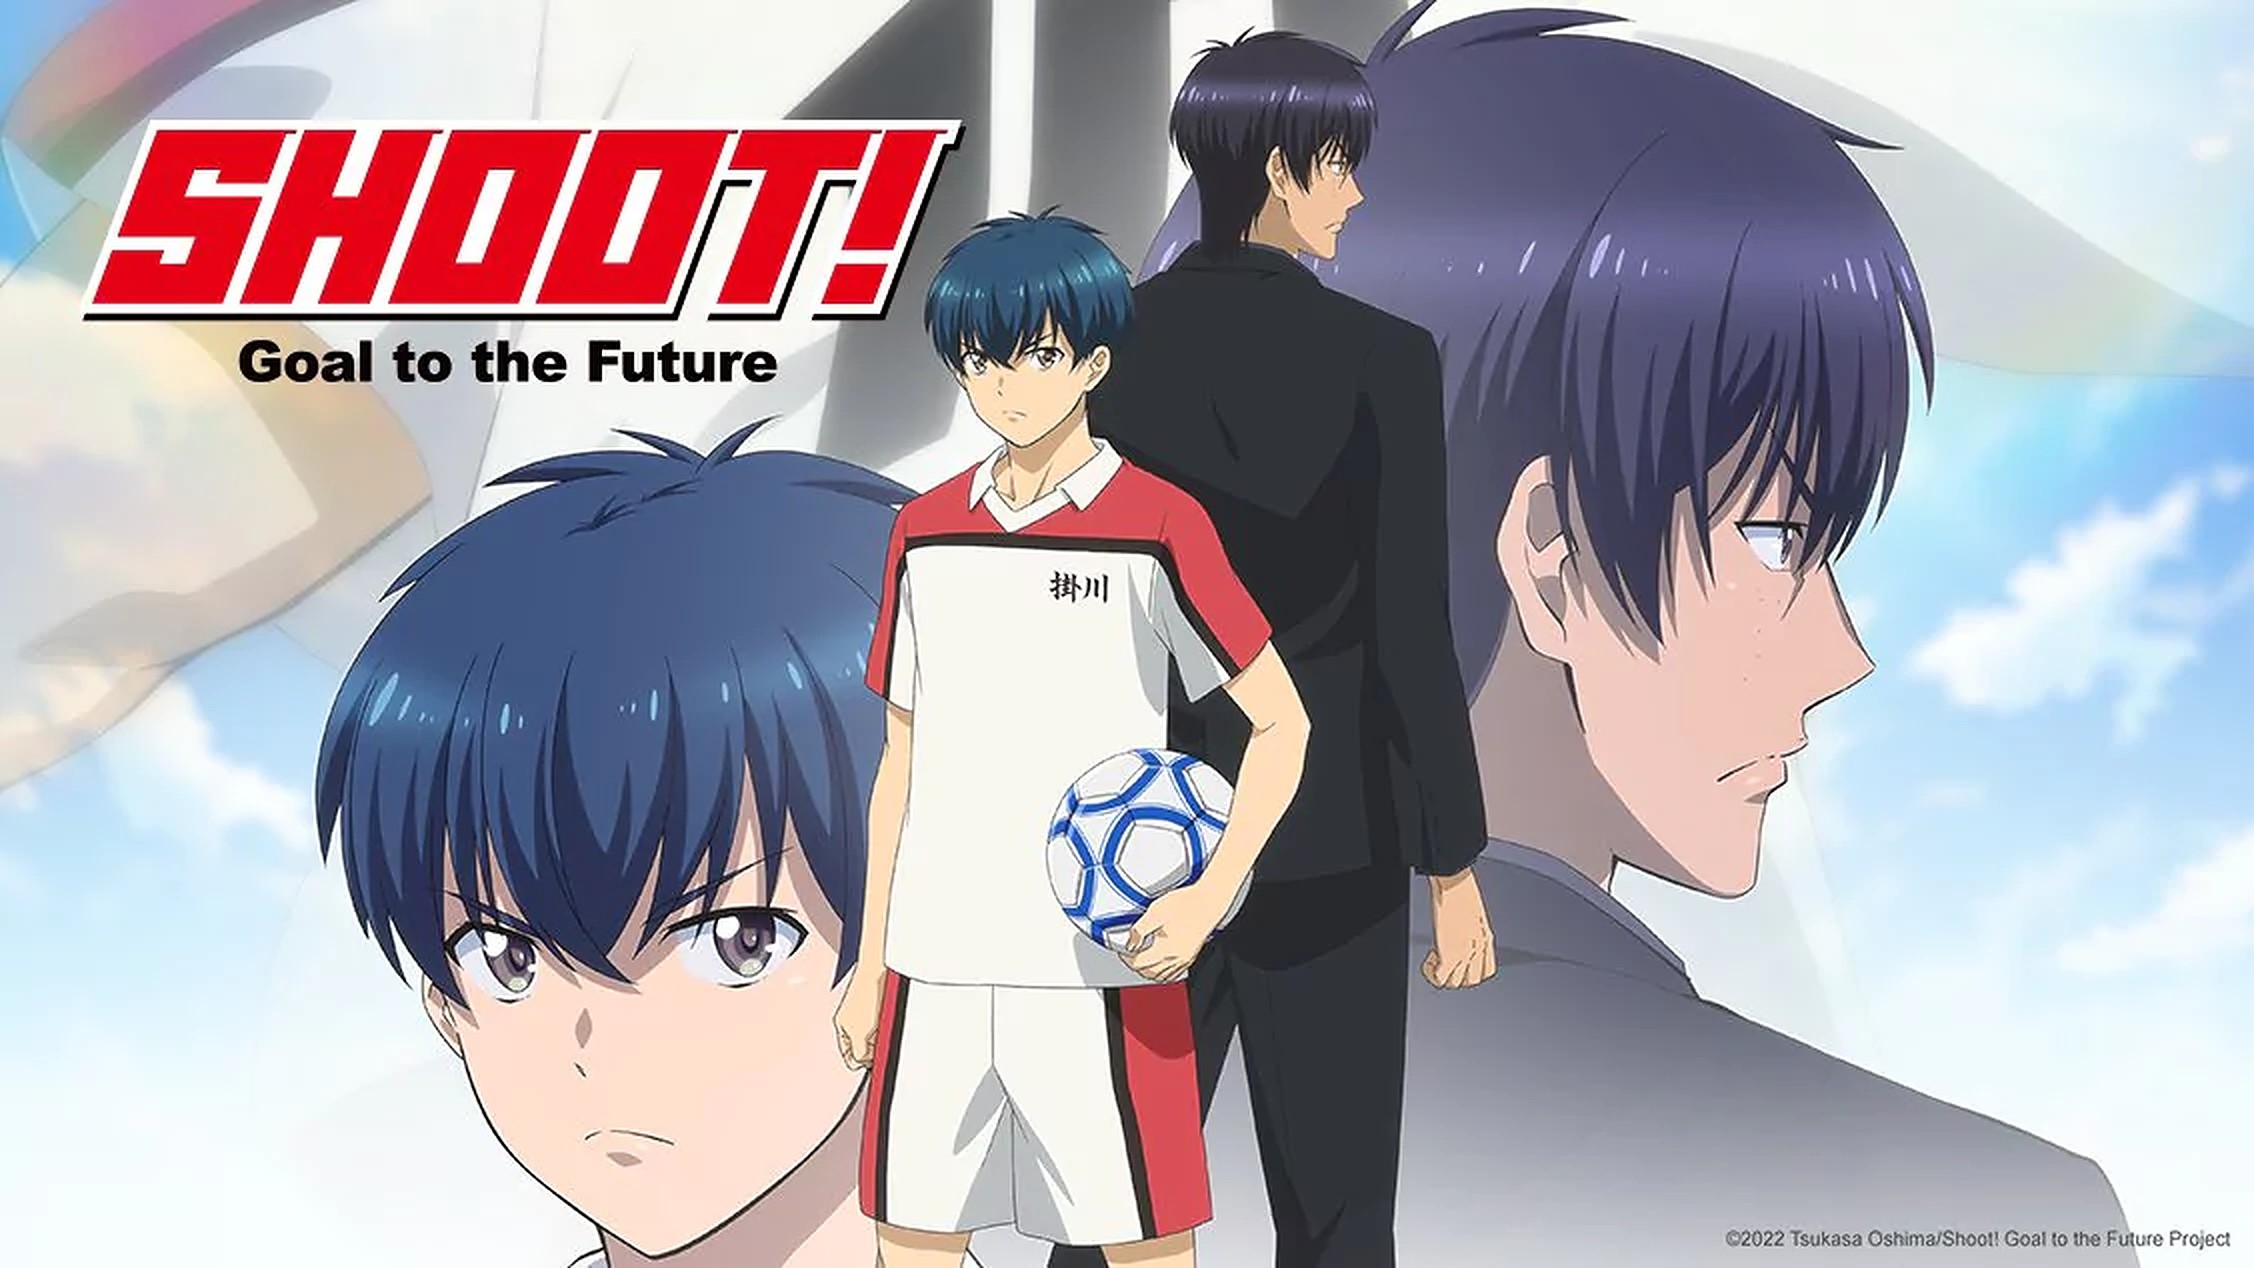 Shoot! Goal to the Future Ep 8 Release Date, Preview